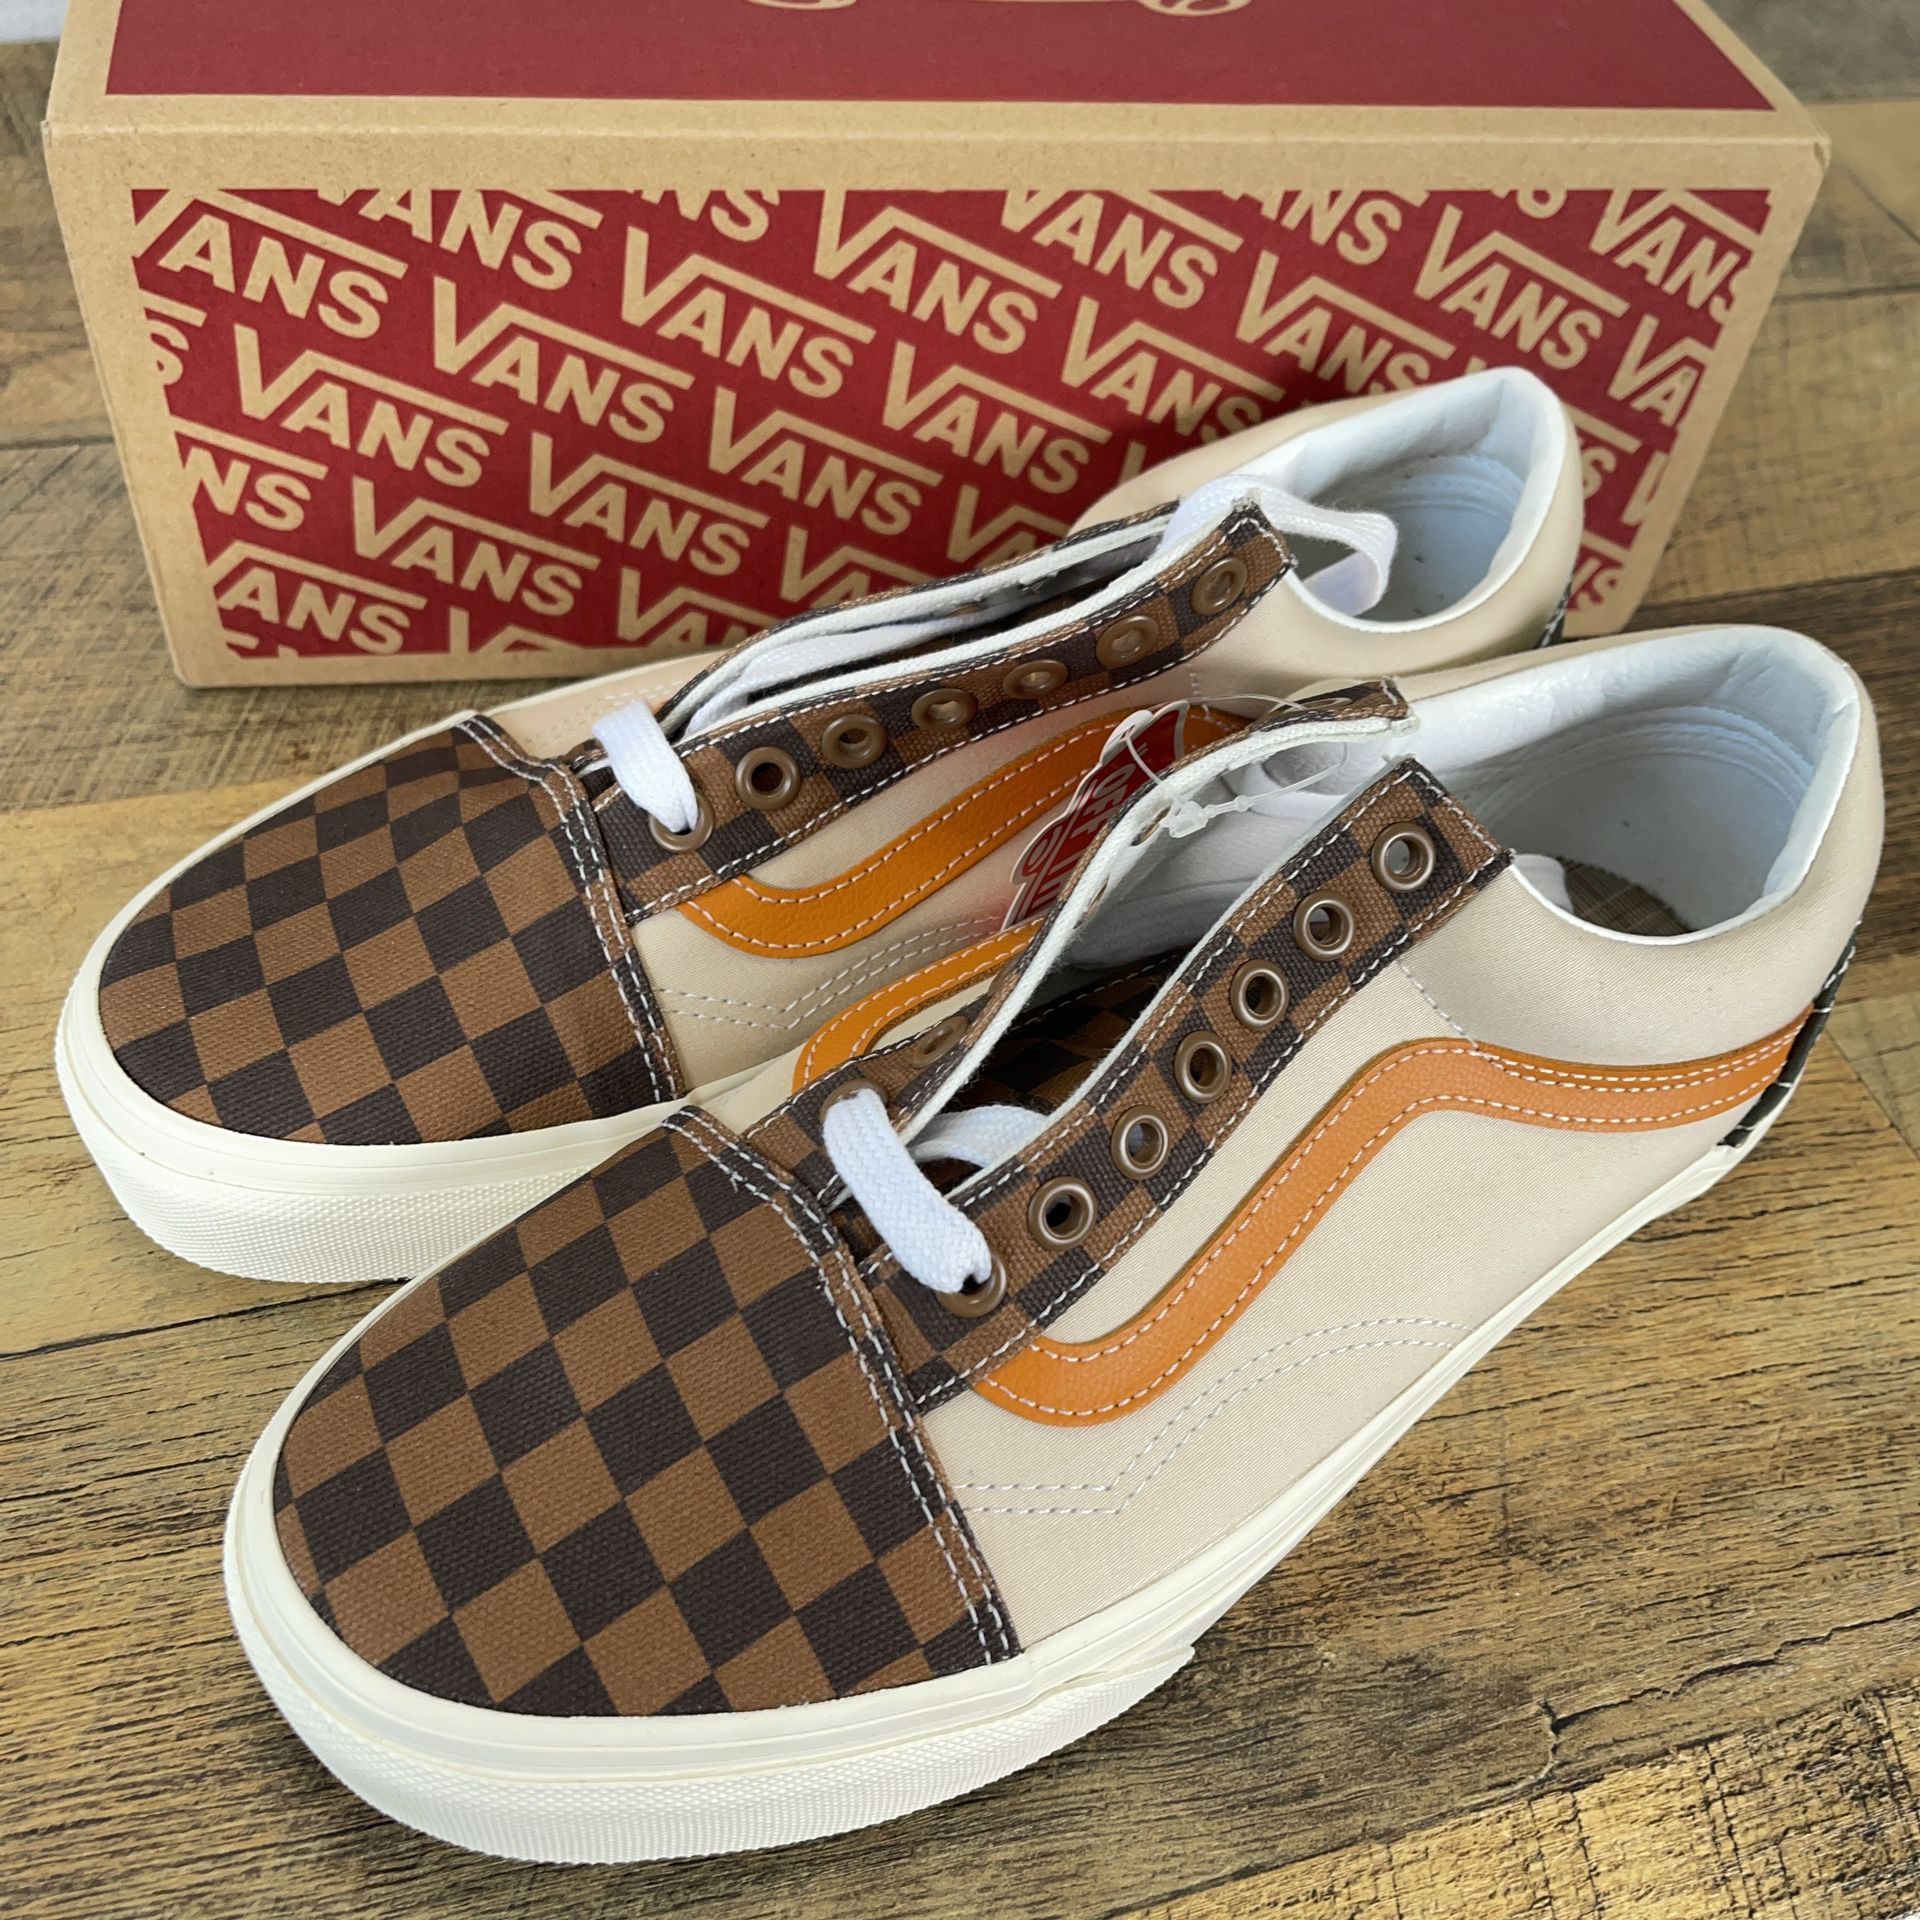 Vans Old Skool Mixed Utility Checkerboard Shoes